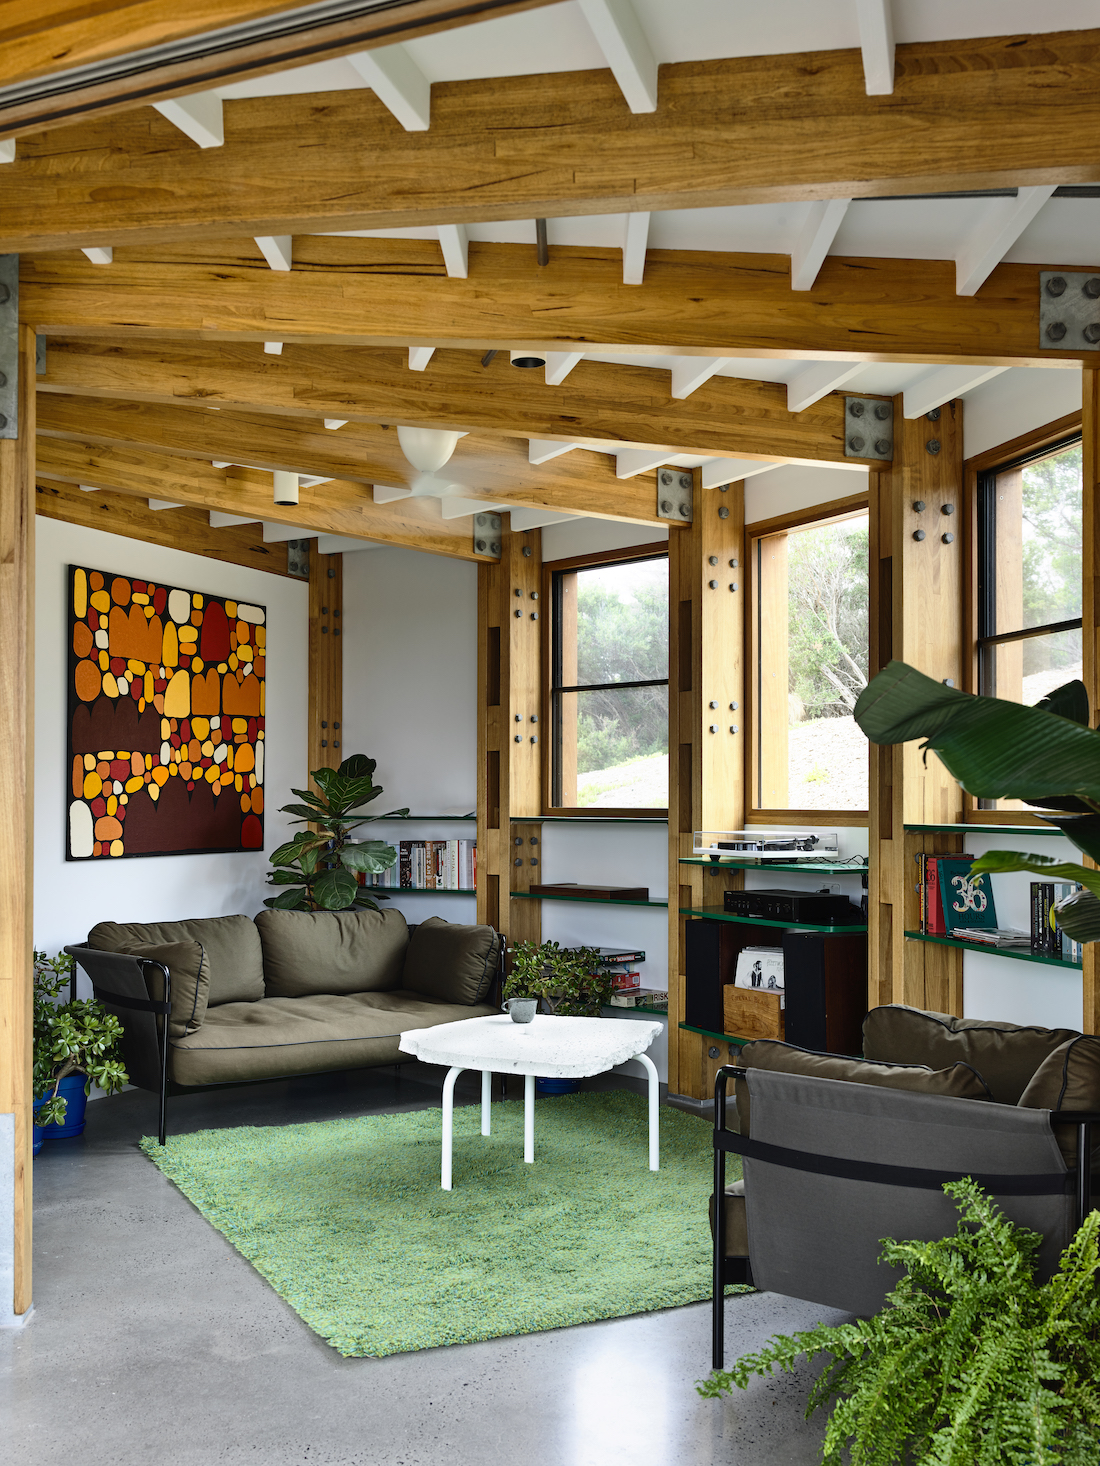 Green floor rug in living room with exposed timber beams